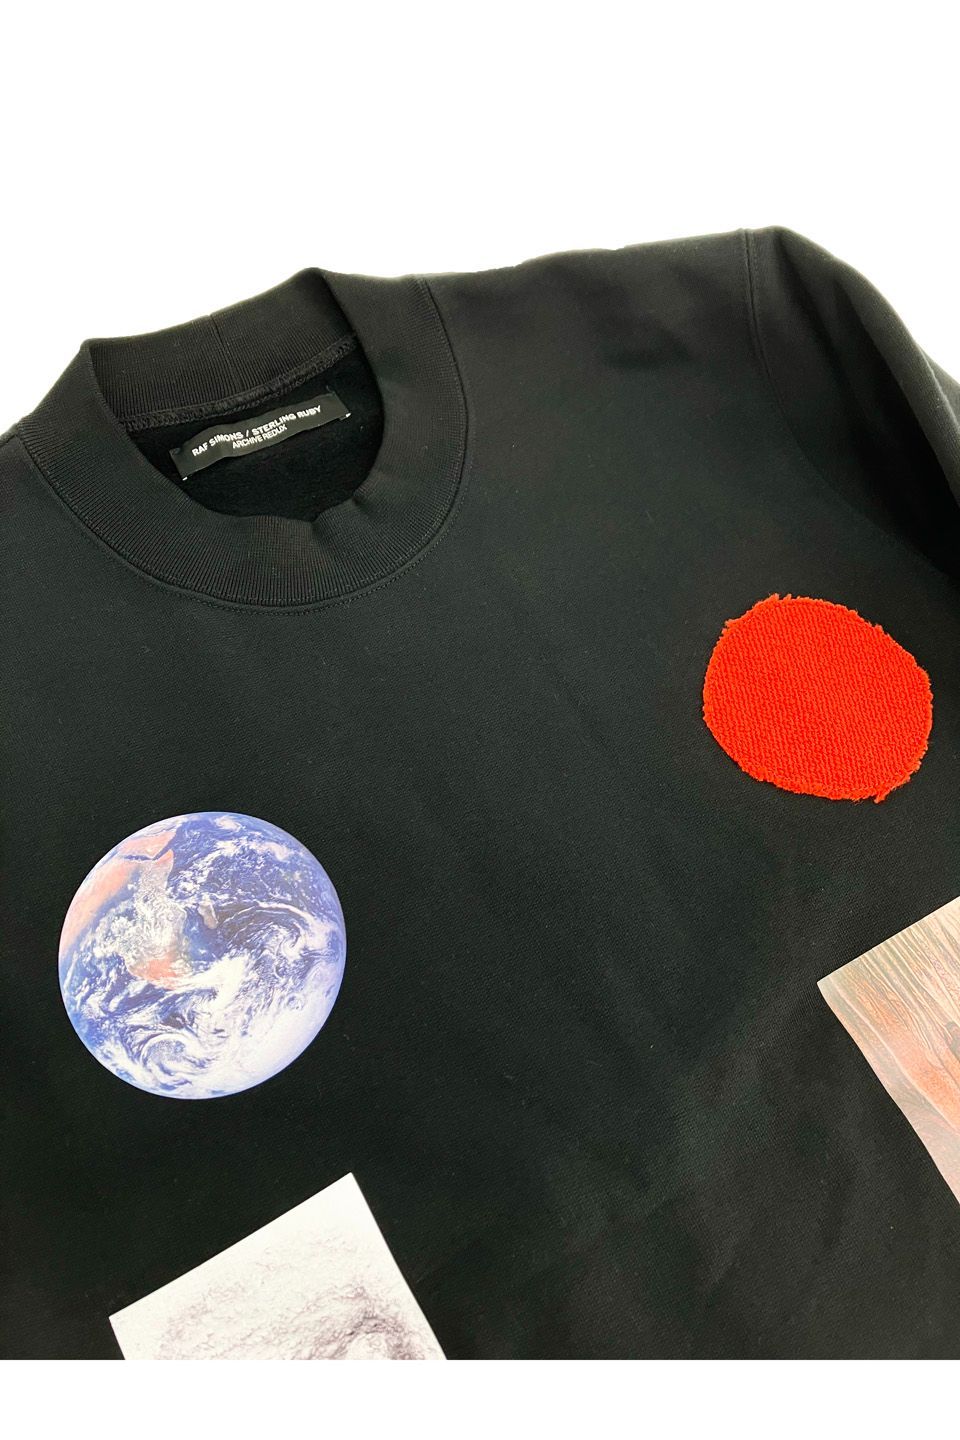 Raf Simons ARCHIVE REDUX Basic sweater with Sterling patches STERLING RUBY  ラフシモンズ アーカイブリダックス ベーシックセーター ウィズ スターリング パッチ スターリングルビー